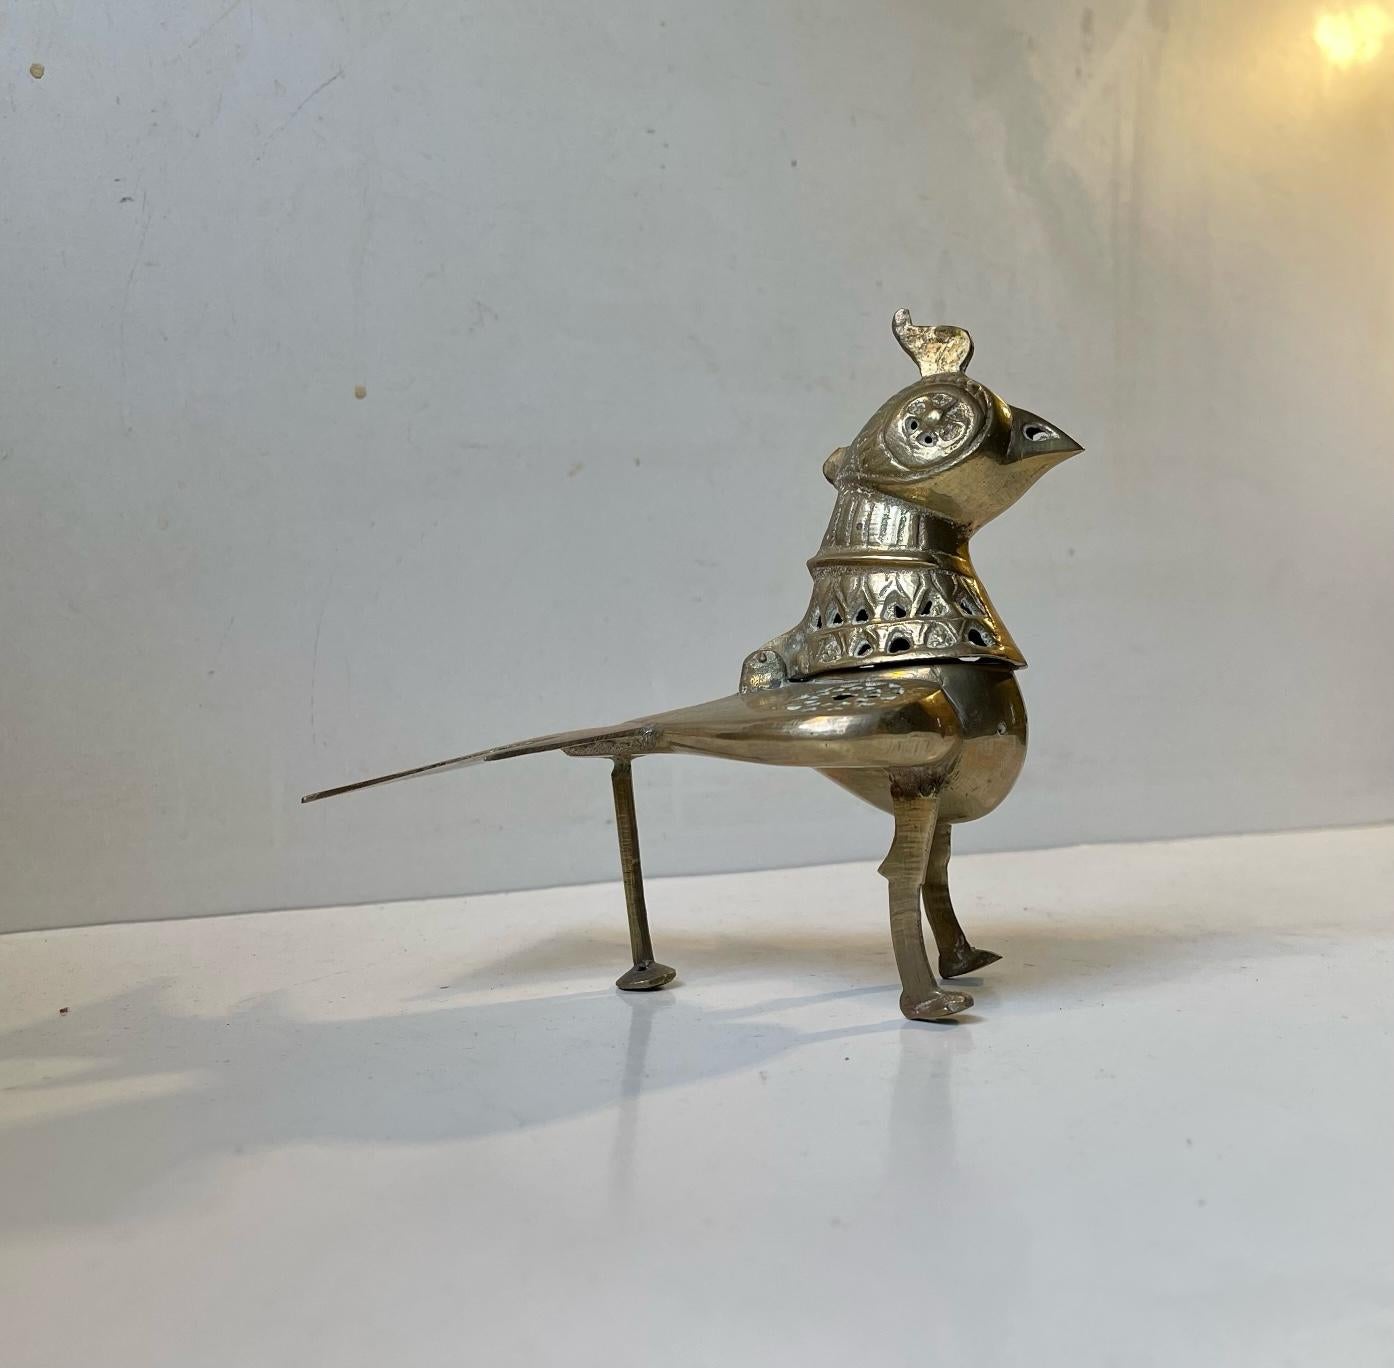 A 1970s interpretation of a 17th century Bird/chicken incense burner from the region of Khorasan in Afganistan. It stands peculiar yet proud. Its made from solid brass - partially perforated allowing the incense to spread in the room. Distinct